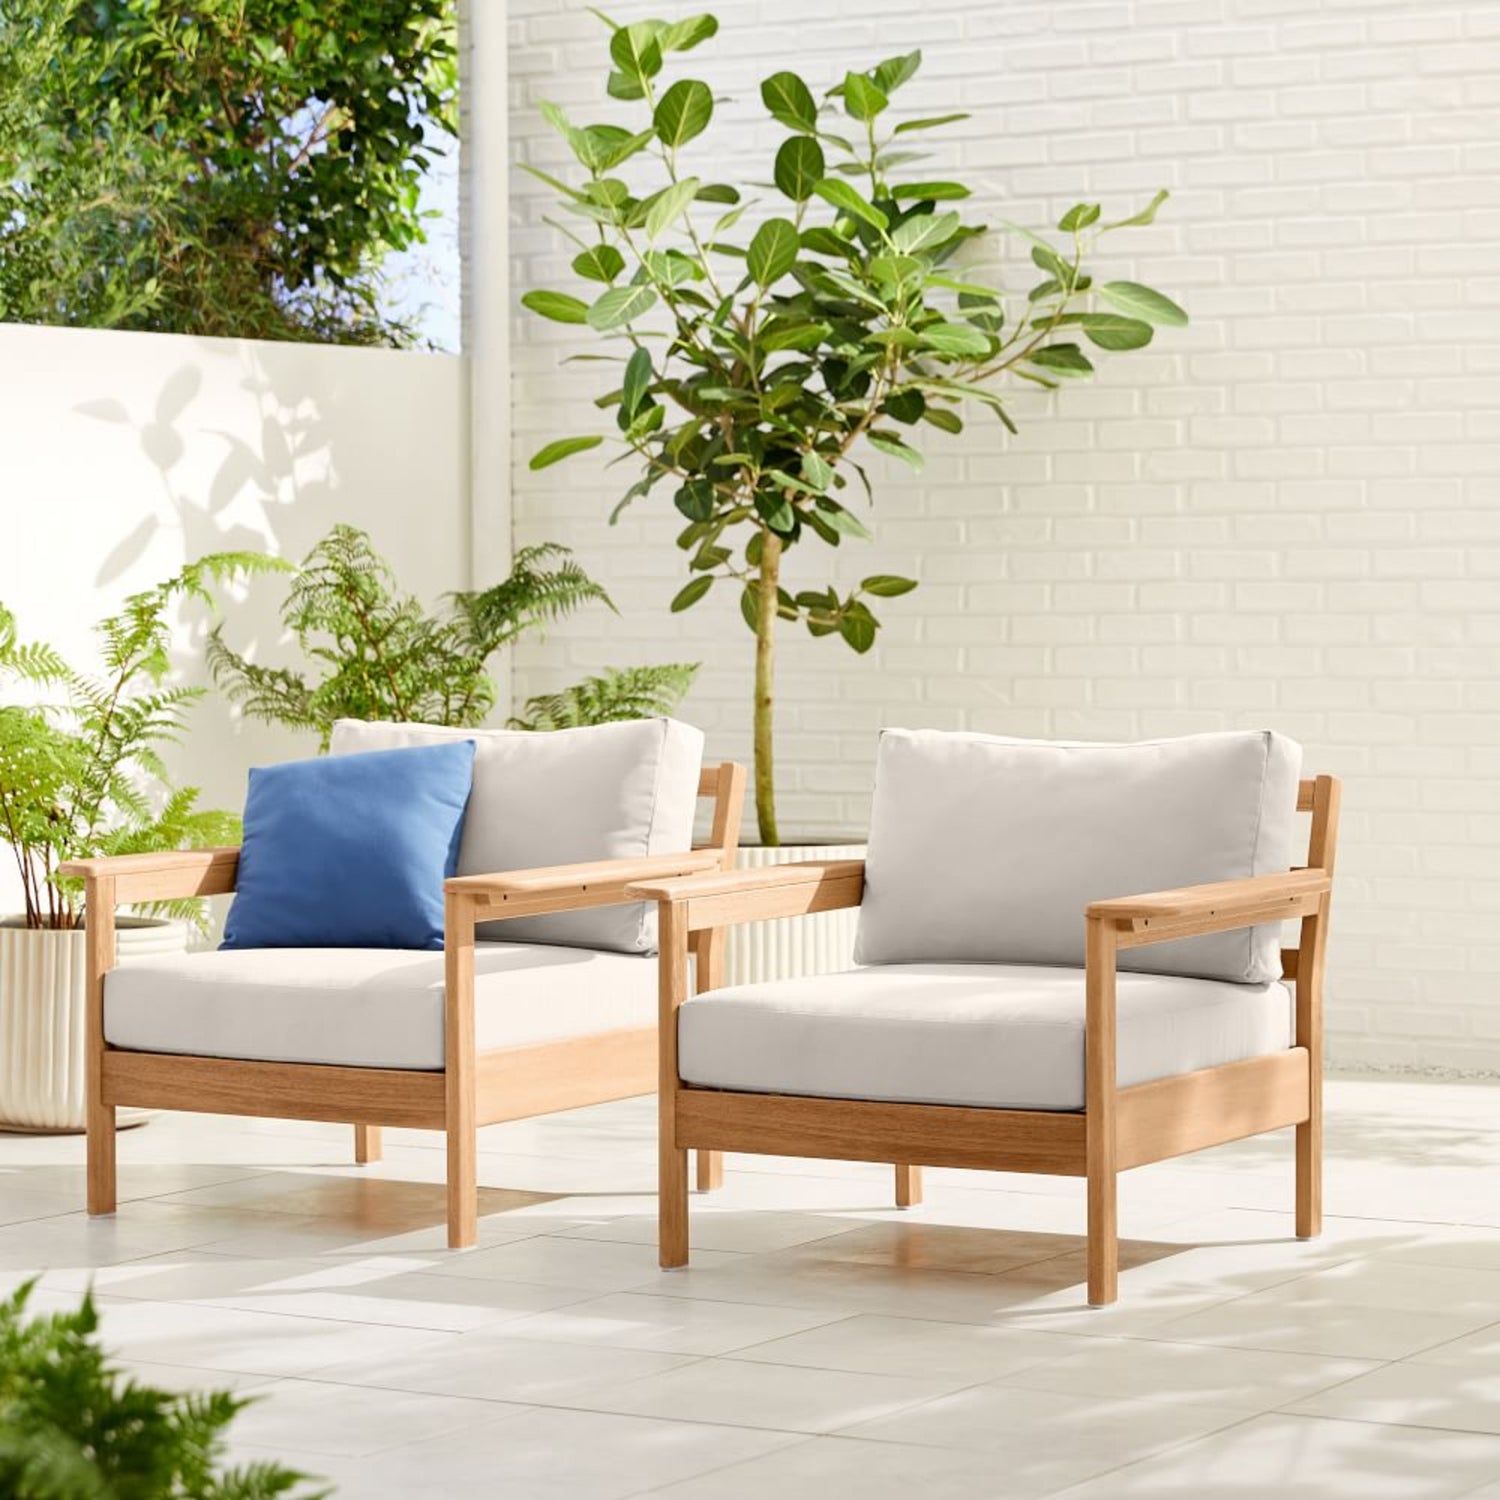 Can Wooden Furniture Be Left Outdoors